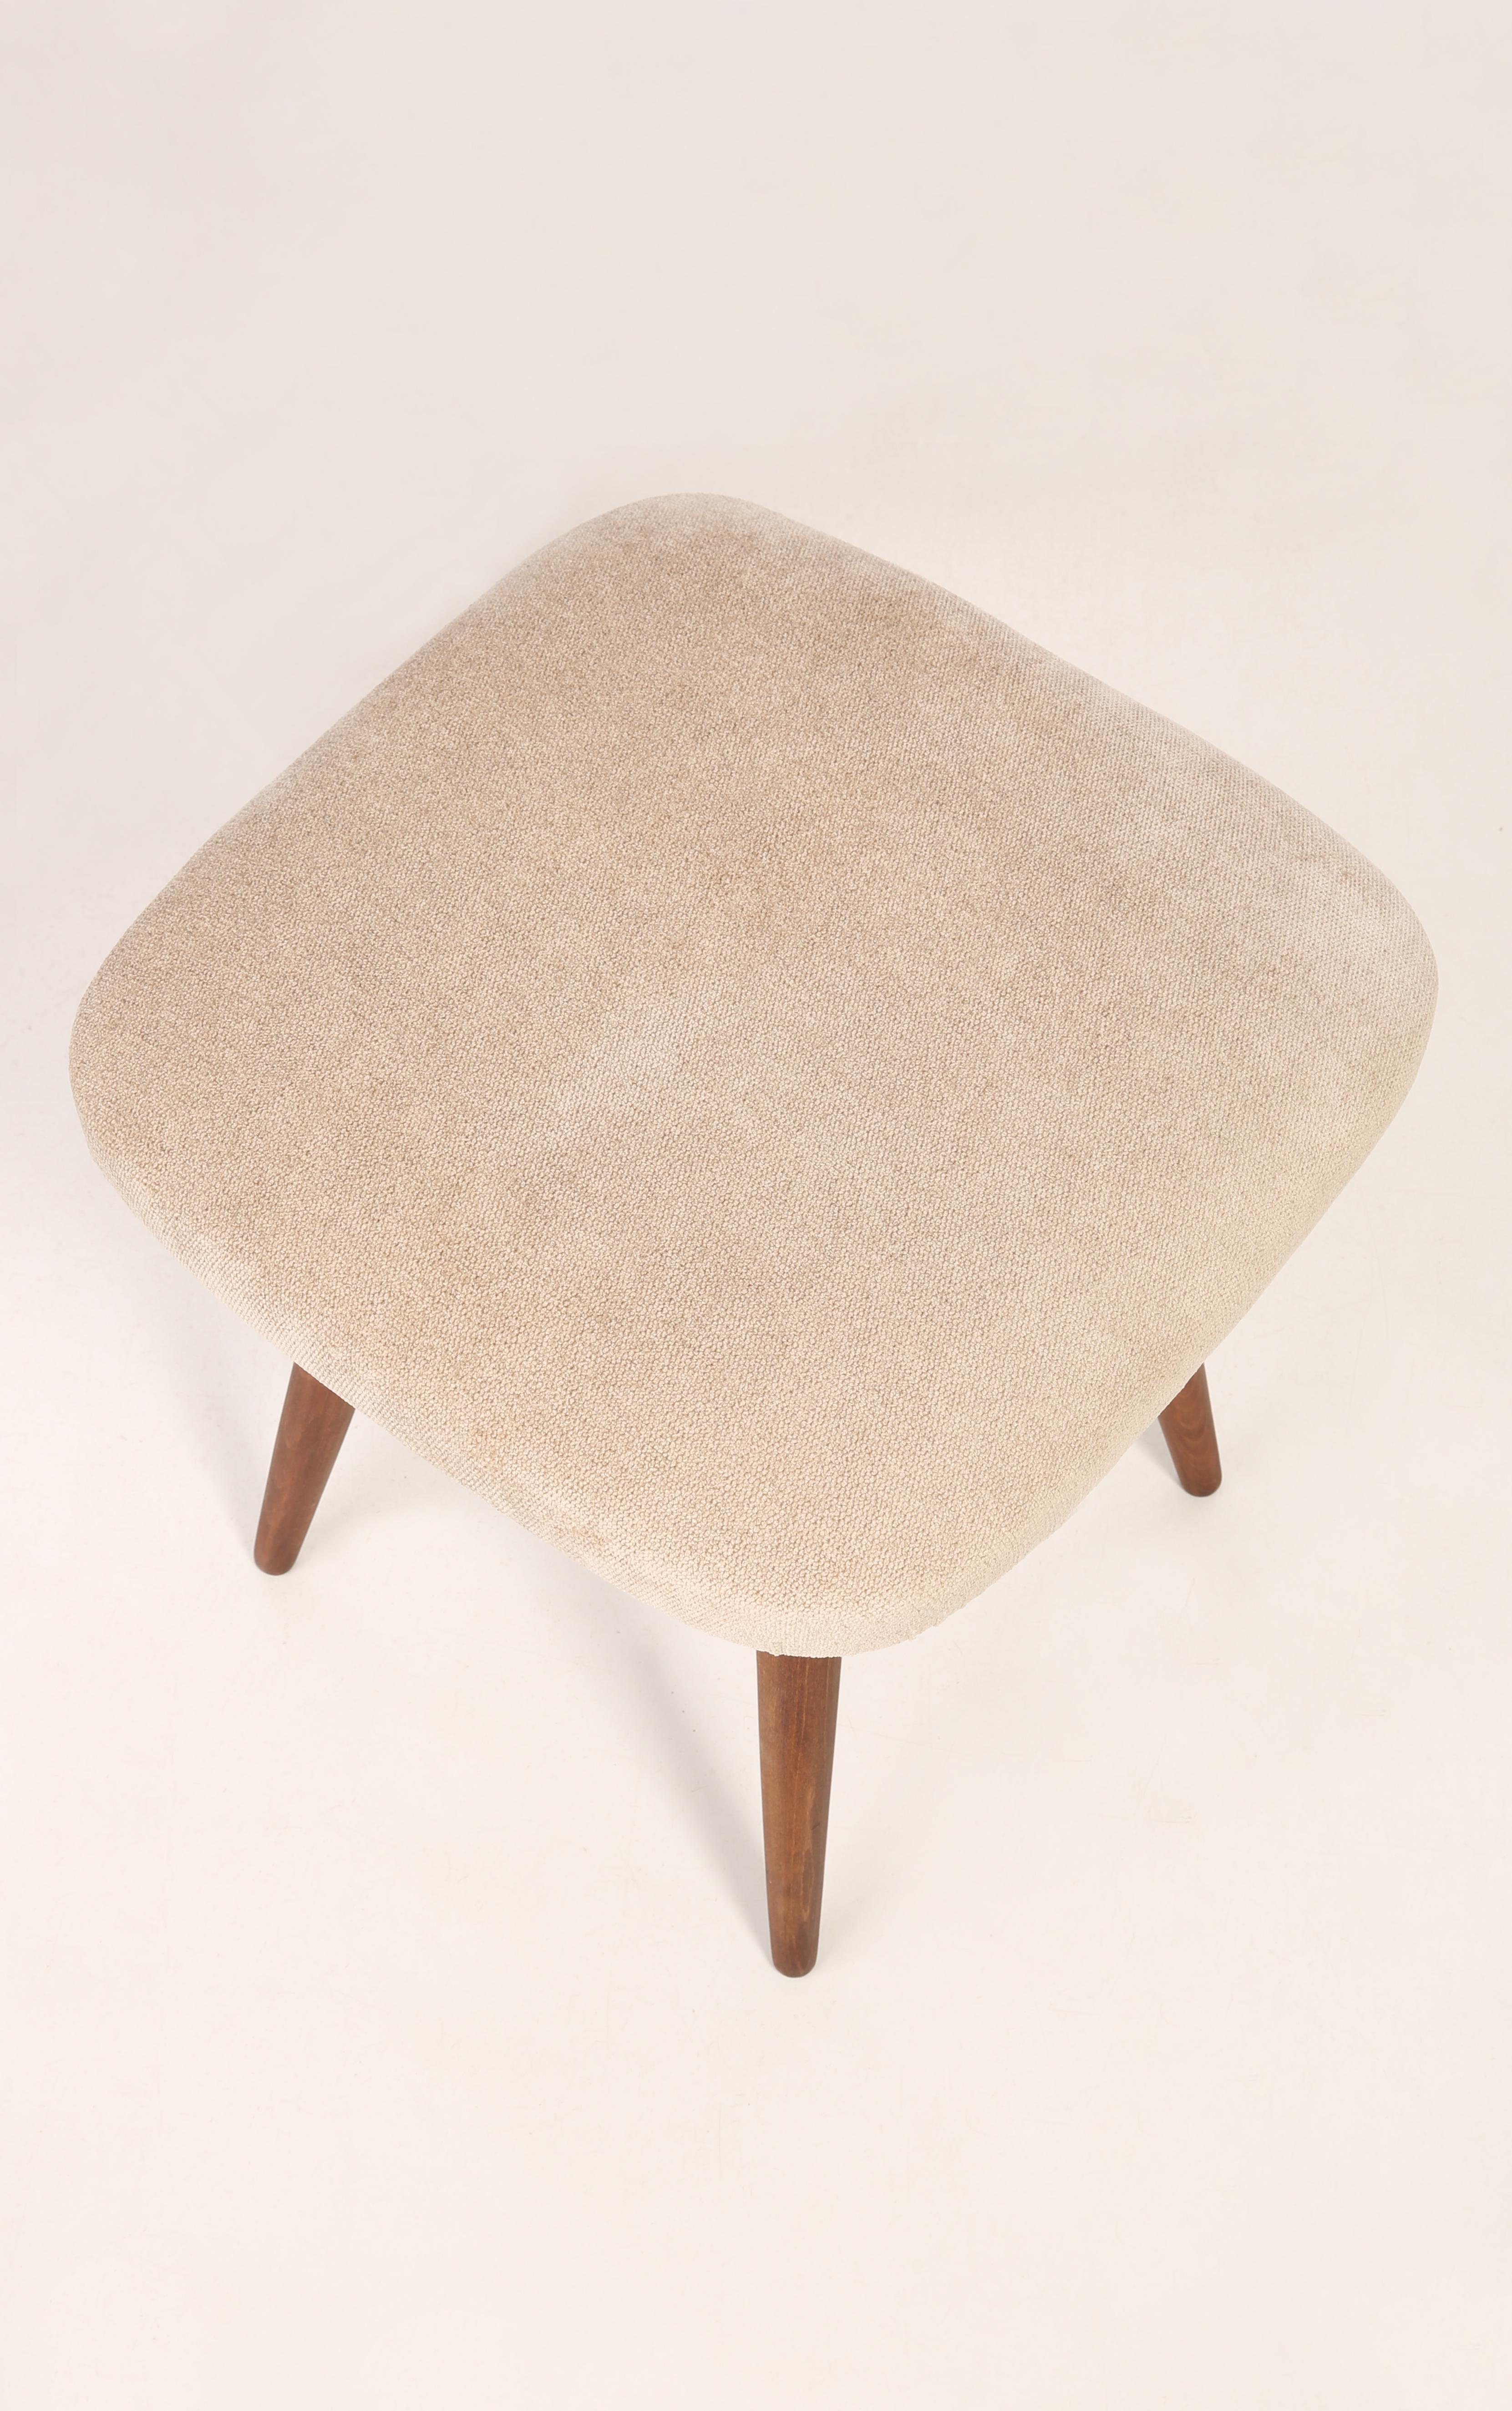 Hand-Crafted Mid-Century Modern Beige Stool, Europe, 1960s For Sale